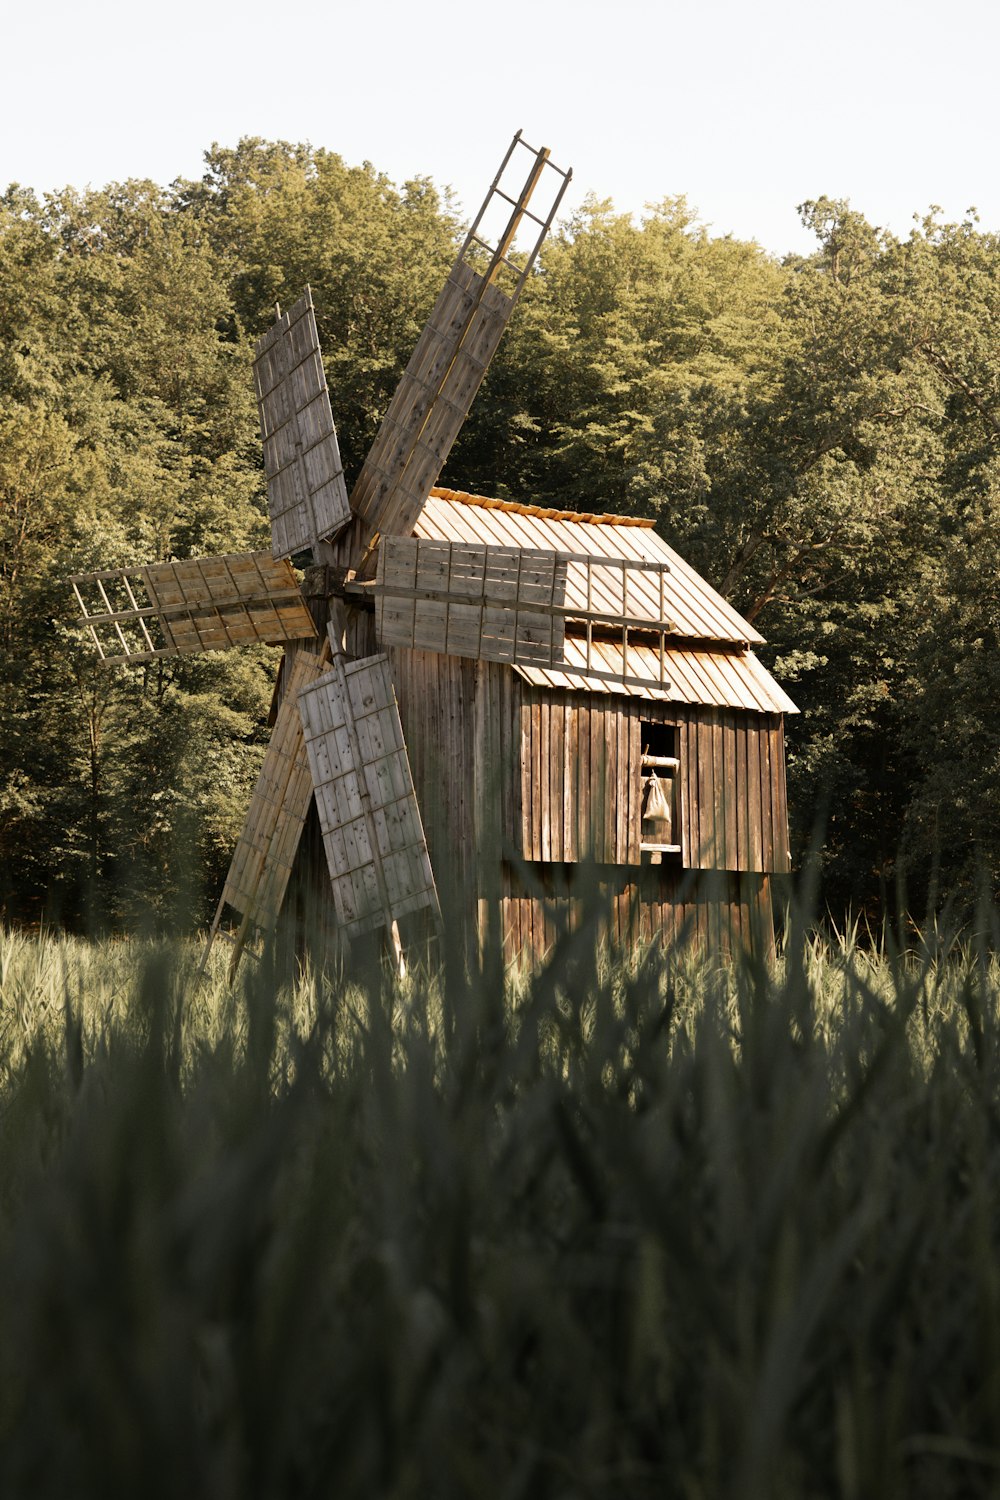 an old wooden windmill in a field with trees in the background